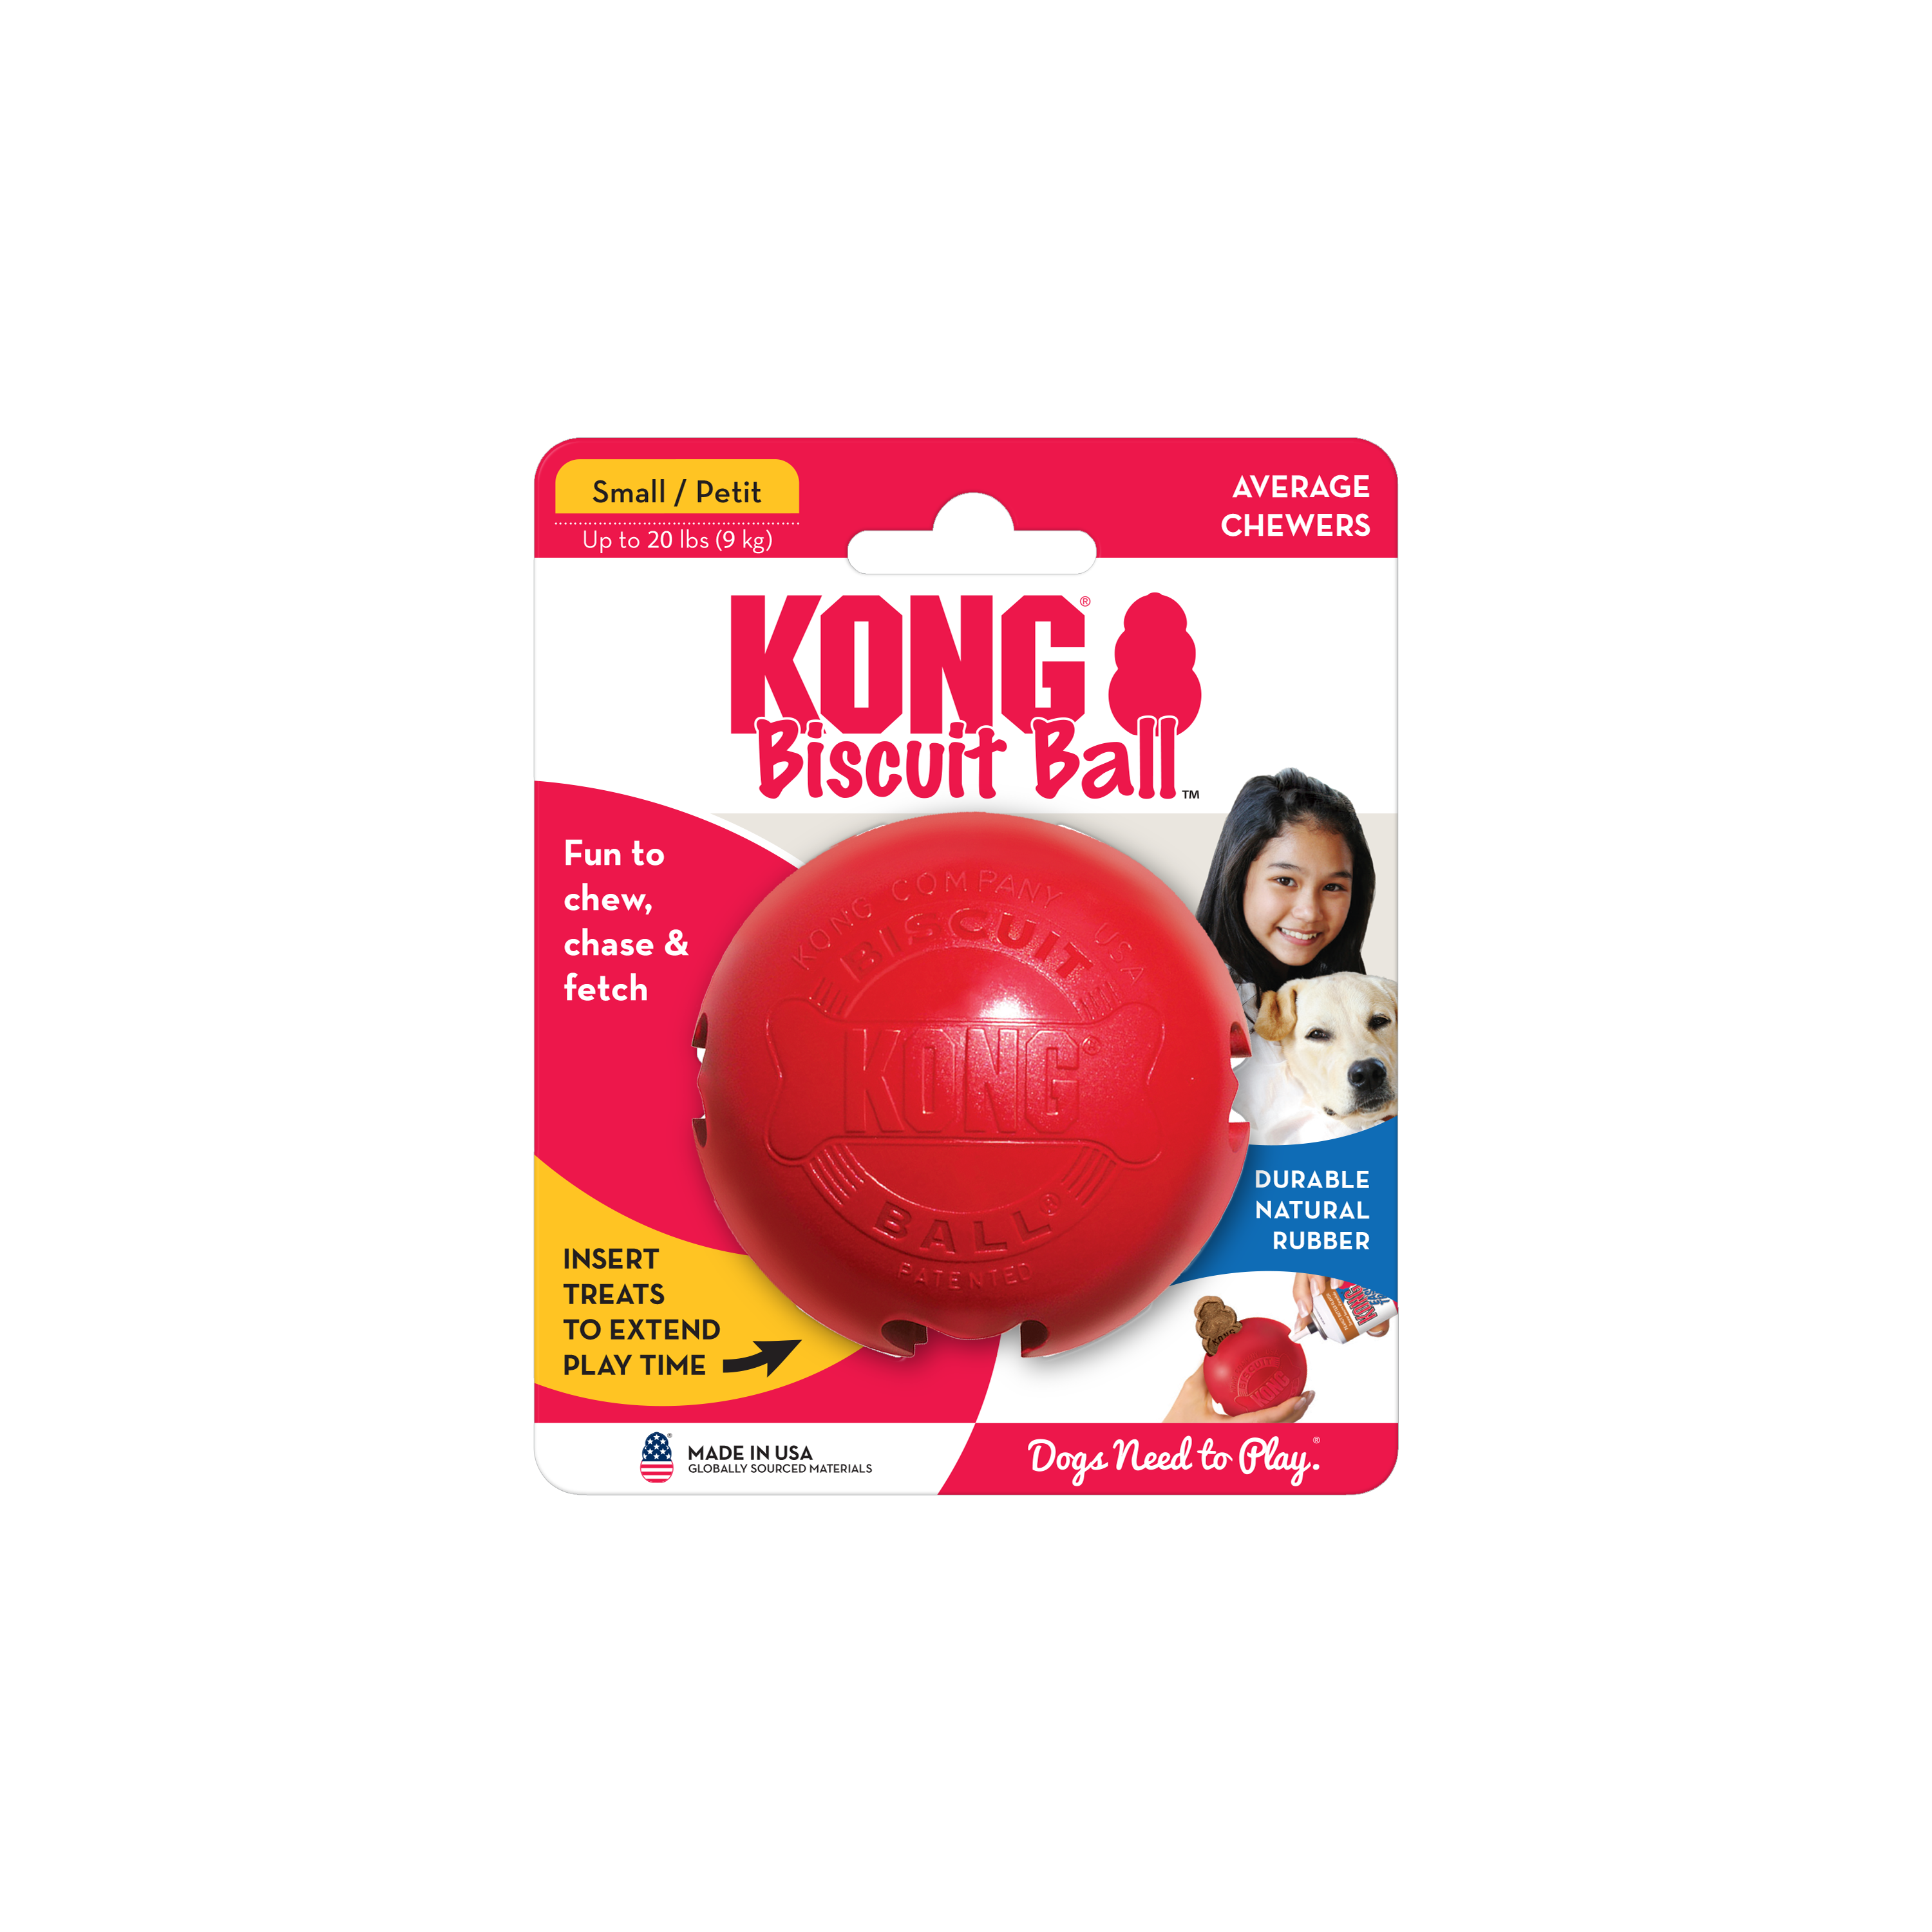 KONG Biscuit Ball onpack product image